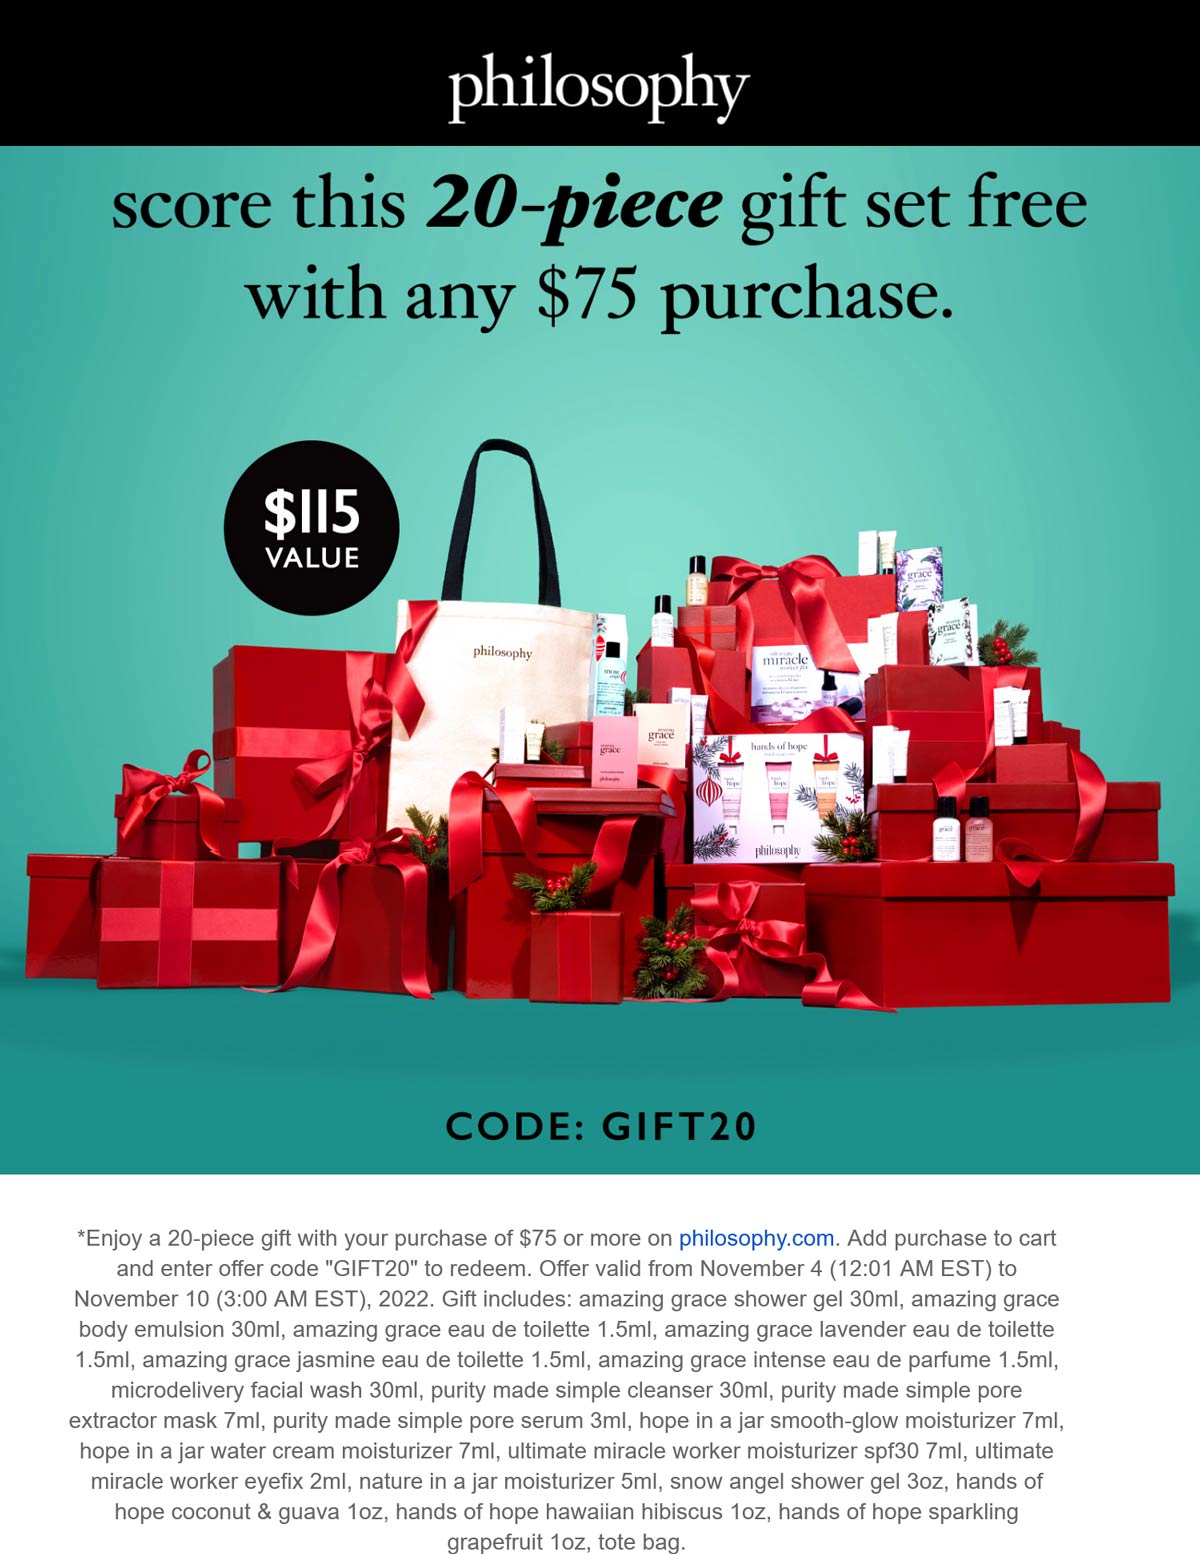 Philosophy stores Coupon  20pc set free on $75 at Philosophy via promo code GIFT20 #philosophy 